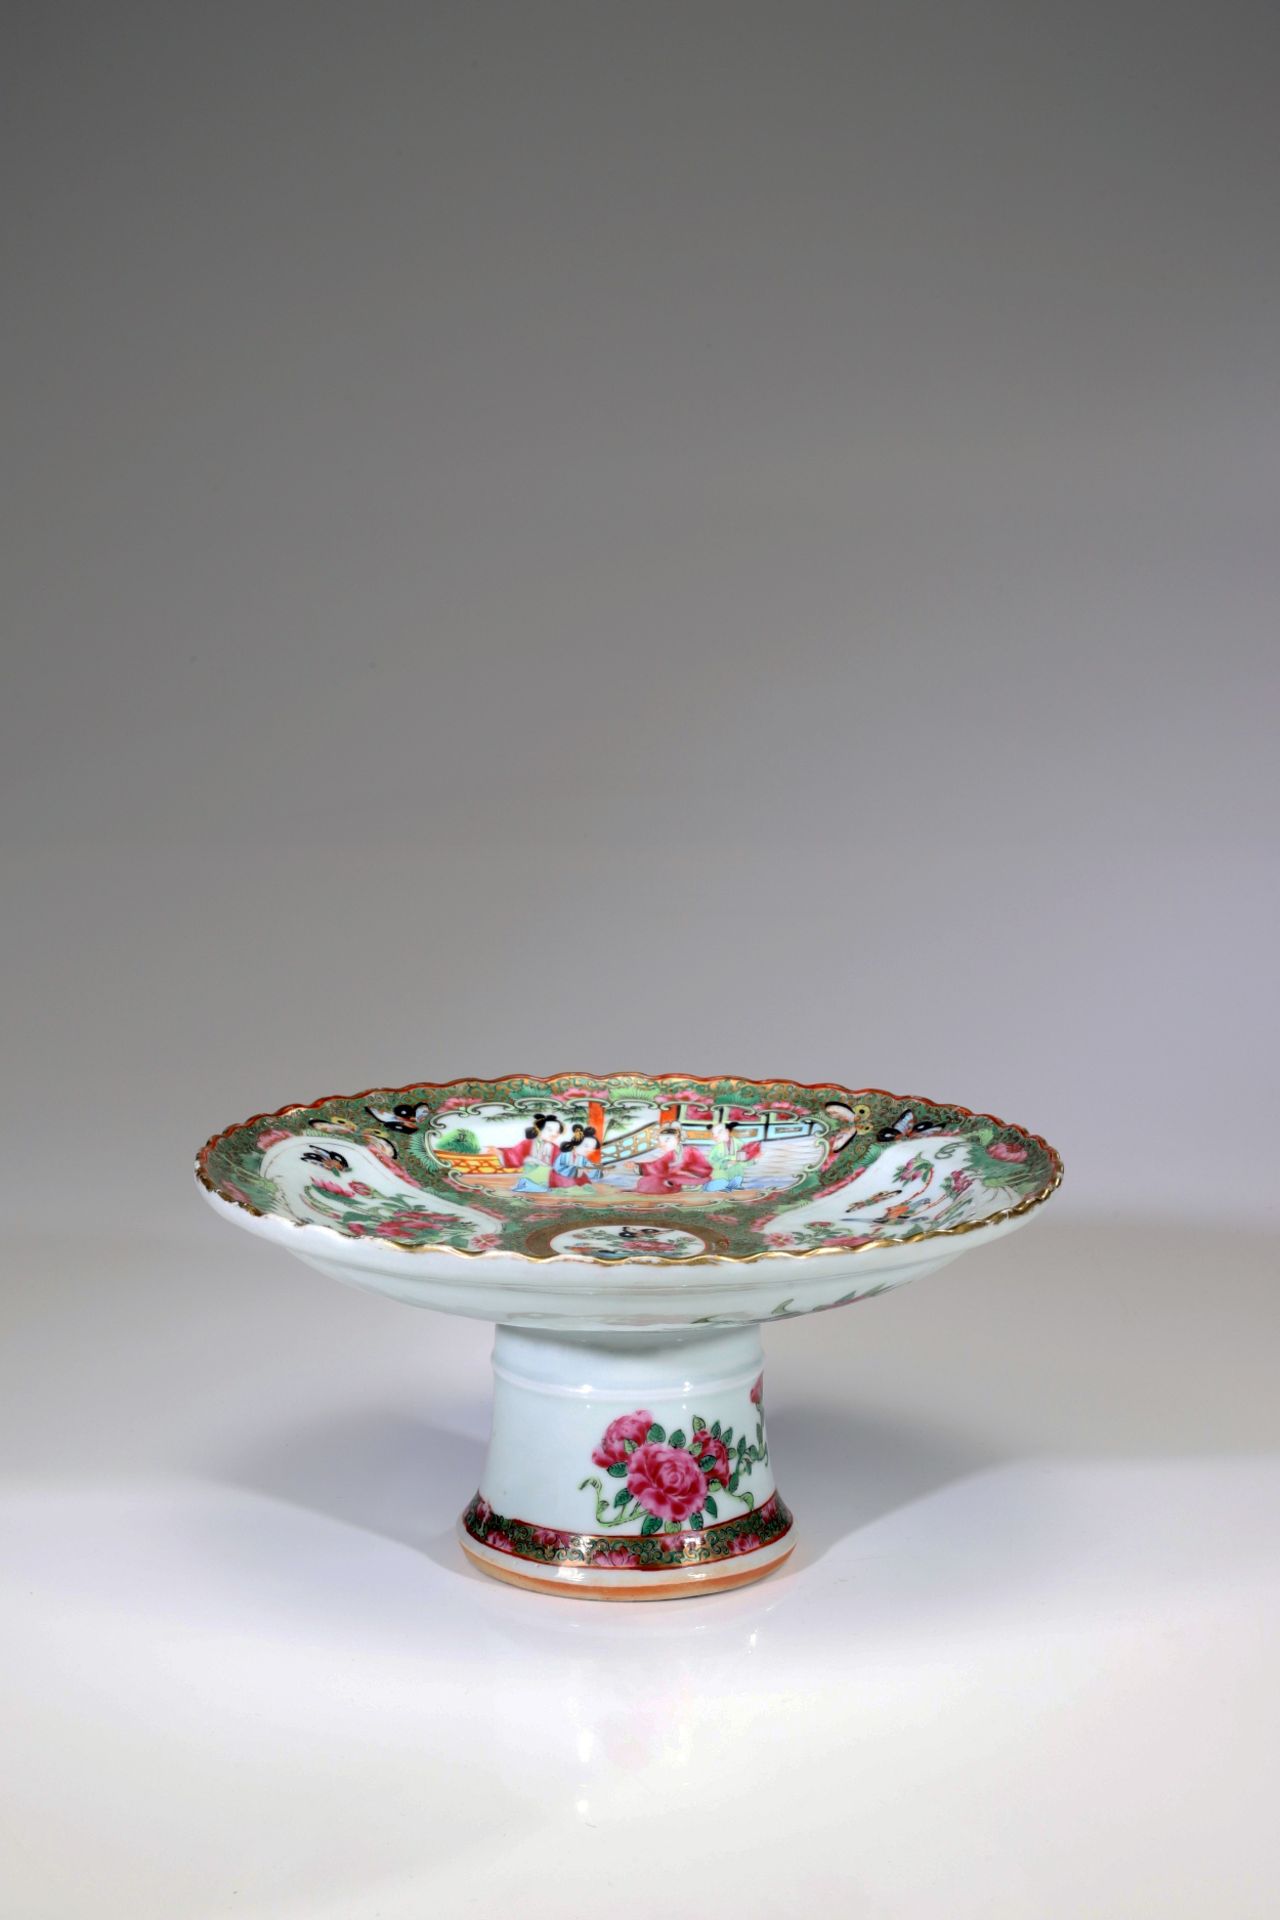 A FAMILLE ROSE 'MEDALLION' EXPORT STEAM DISH